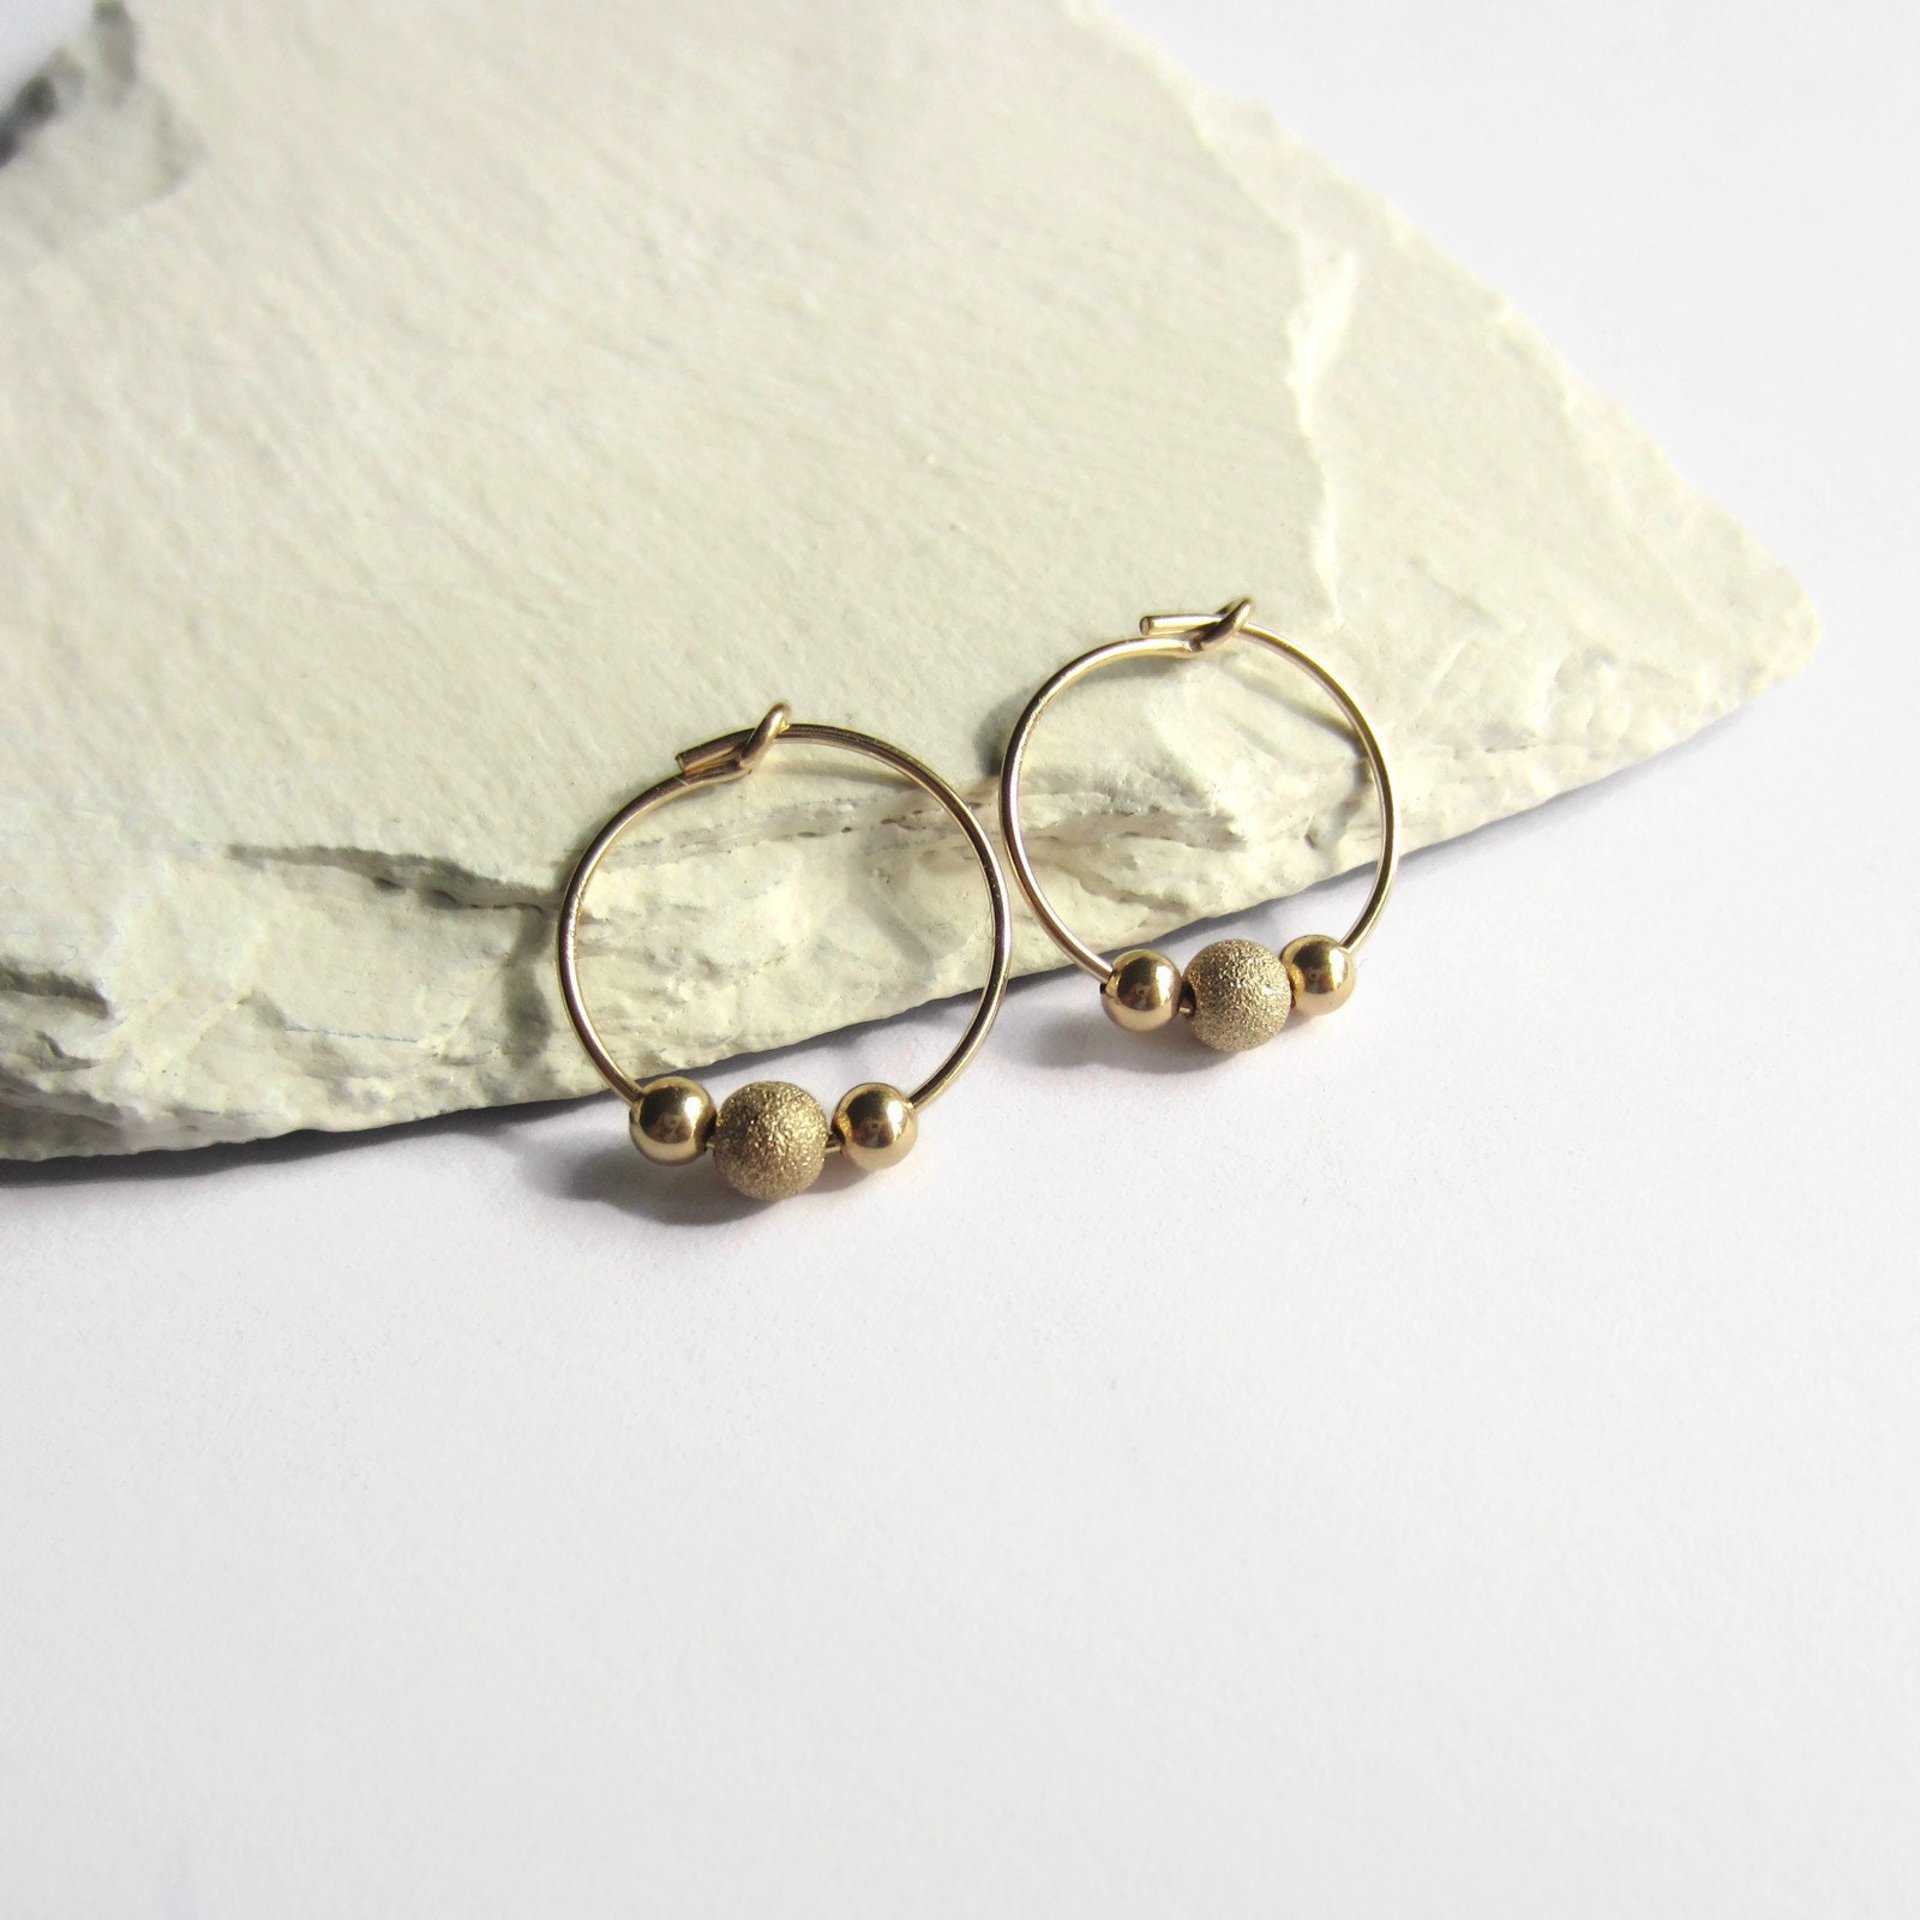 14 Carat Gold Filled Stardust Bead Hoop Earrings ~ Handmade by The Tiny Tree Frog Jewellery